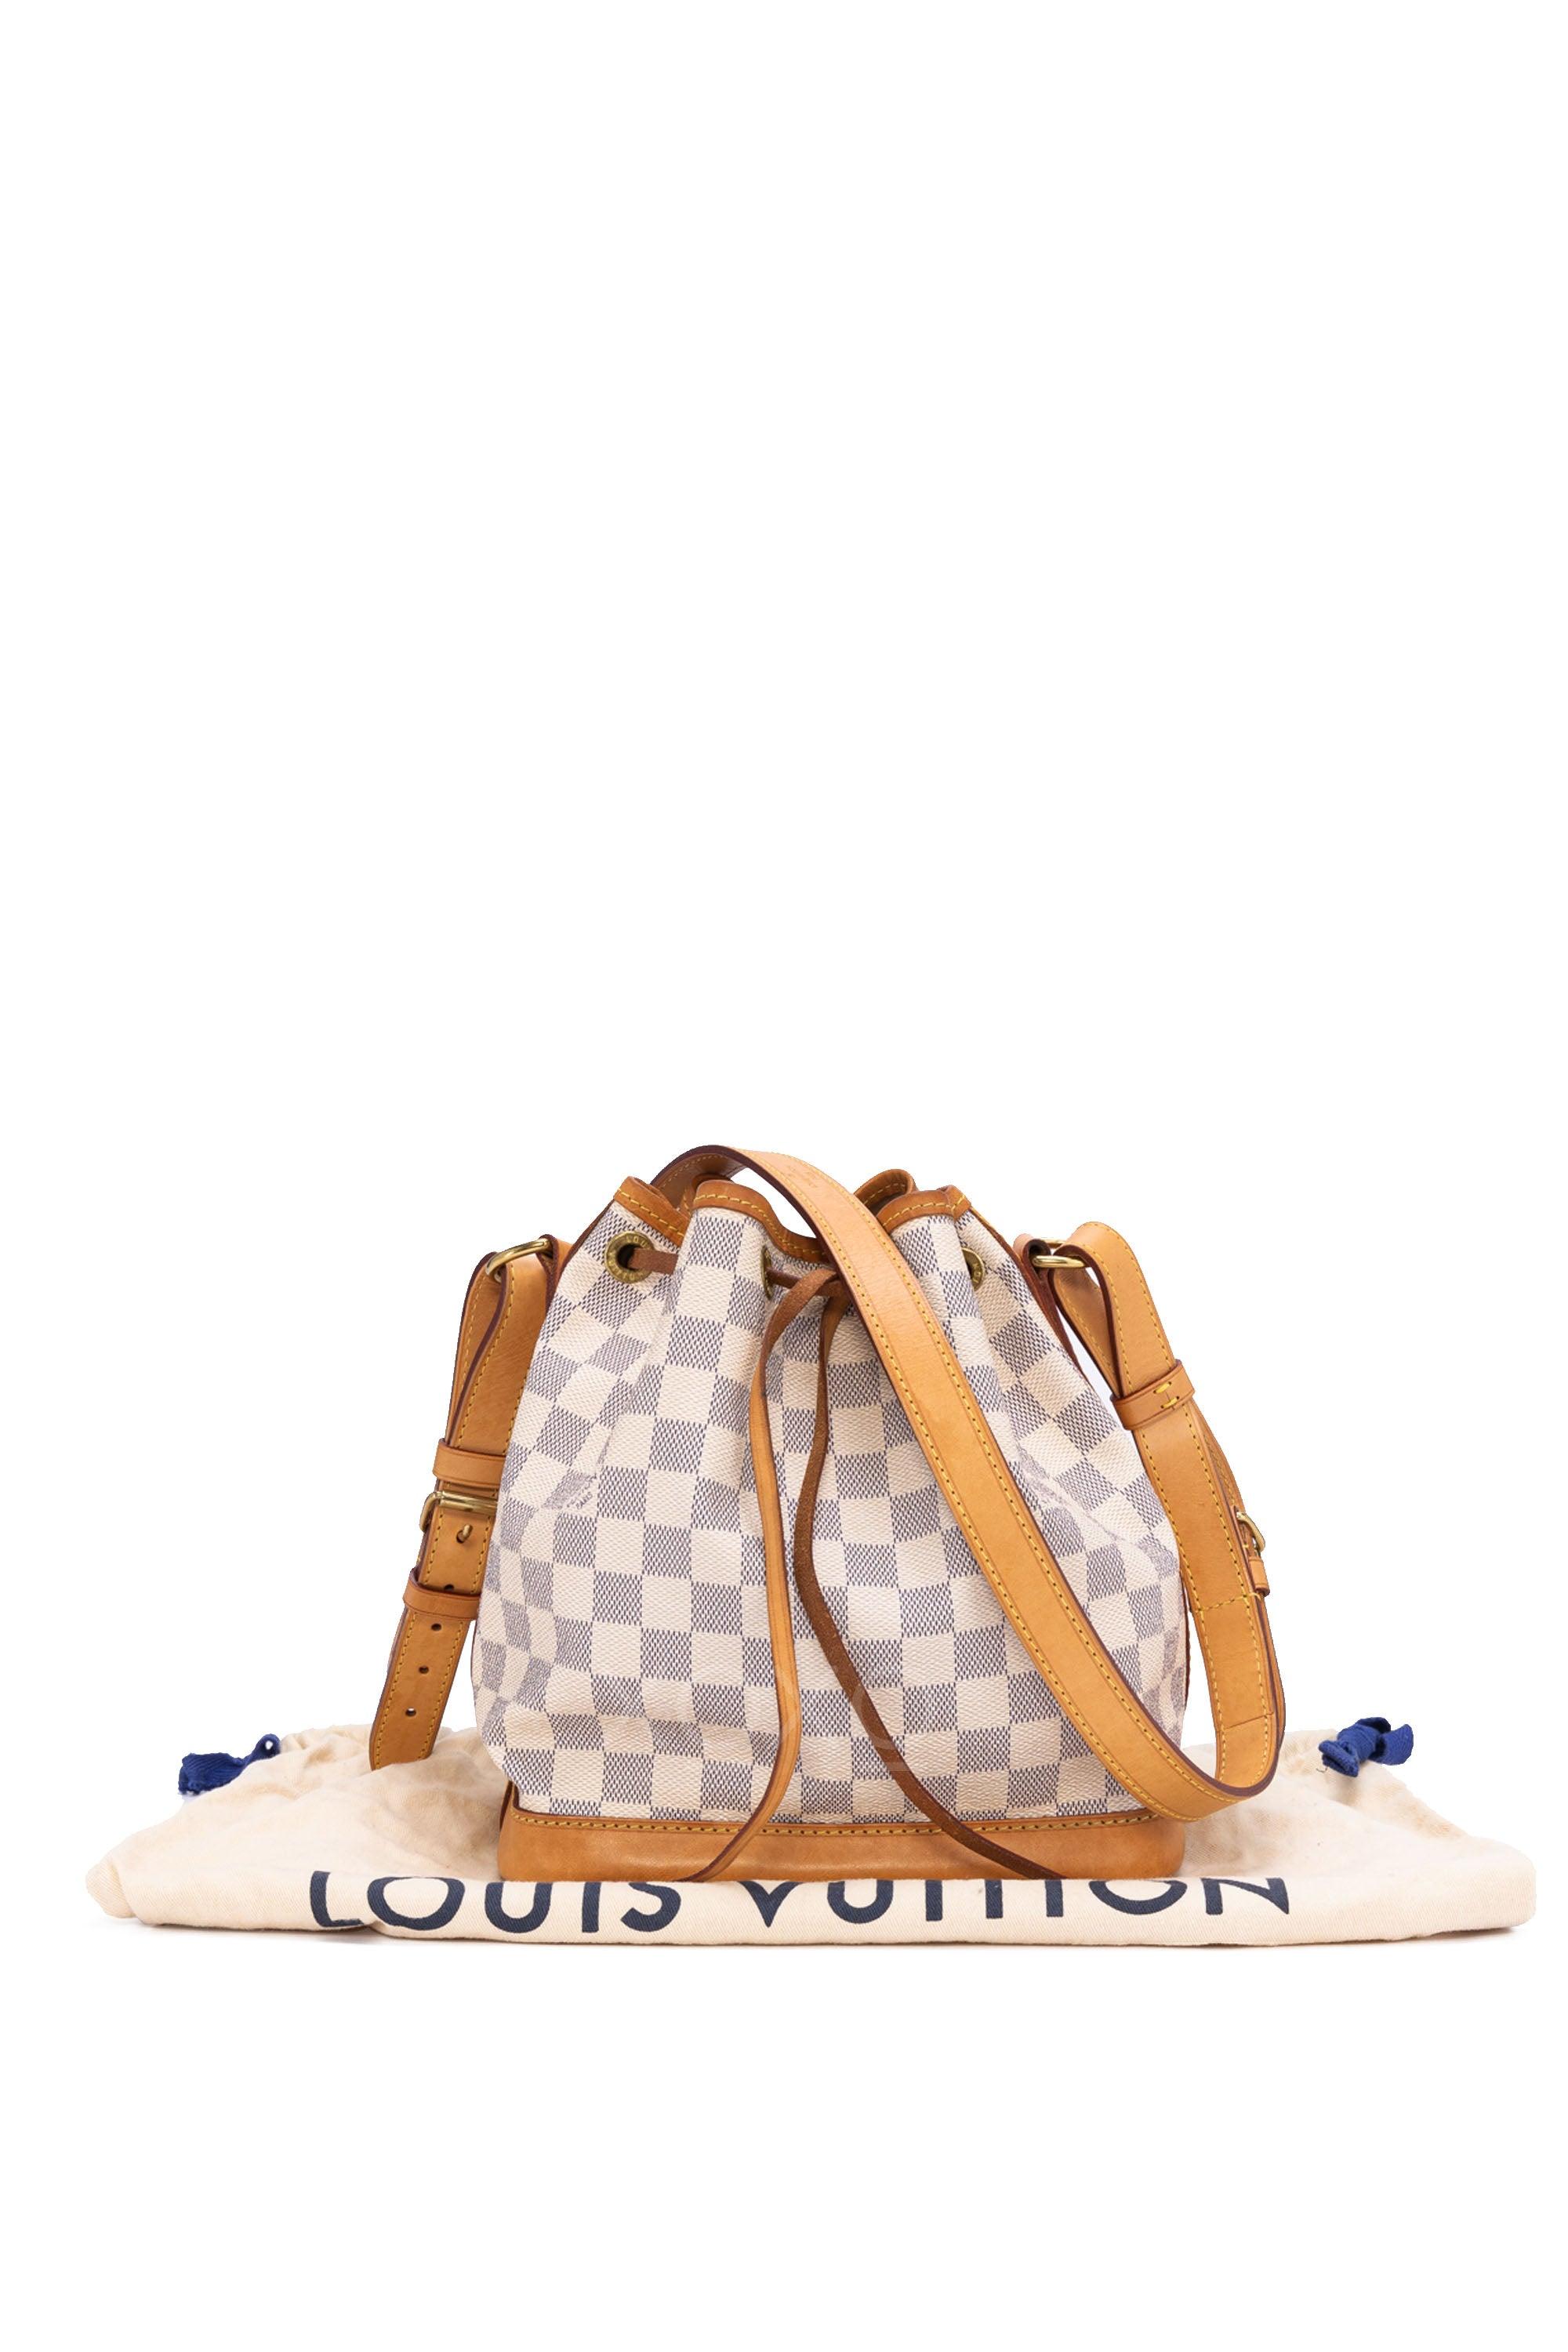 100% Authentic LV Neo Noe Brown Damier Ebene Bucket Bag.Red suede leather  in interior.None wears.Large capacity.Purchased in…